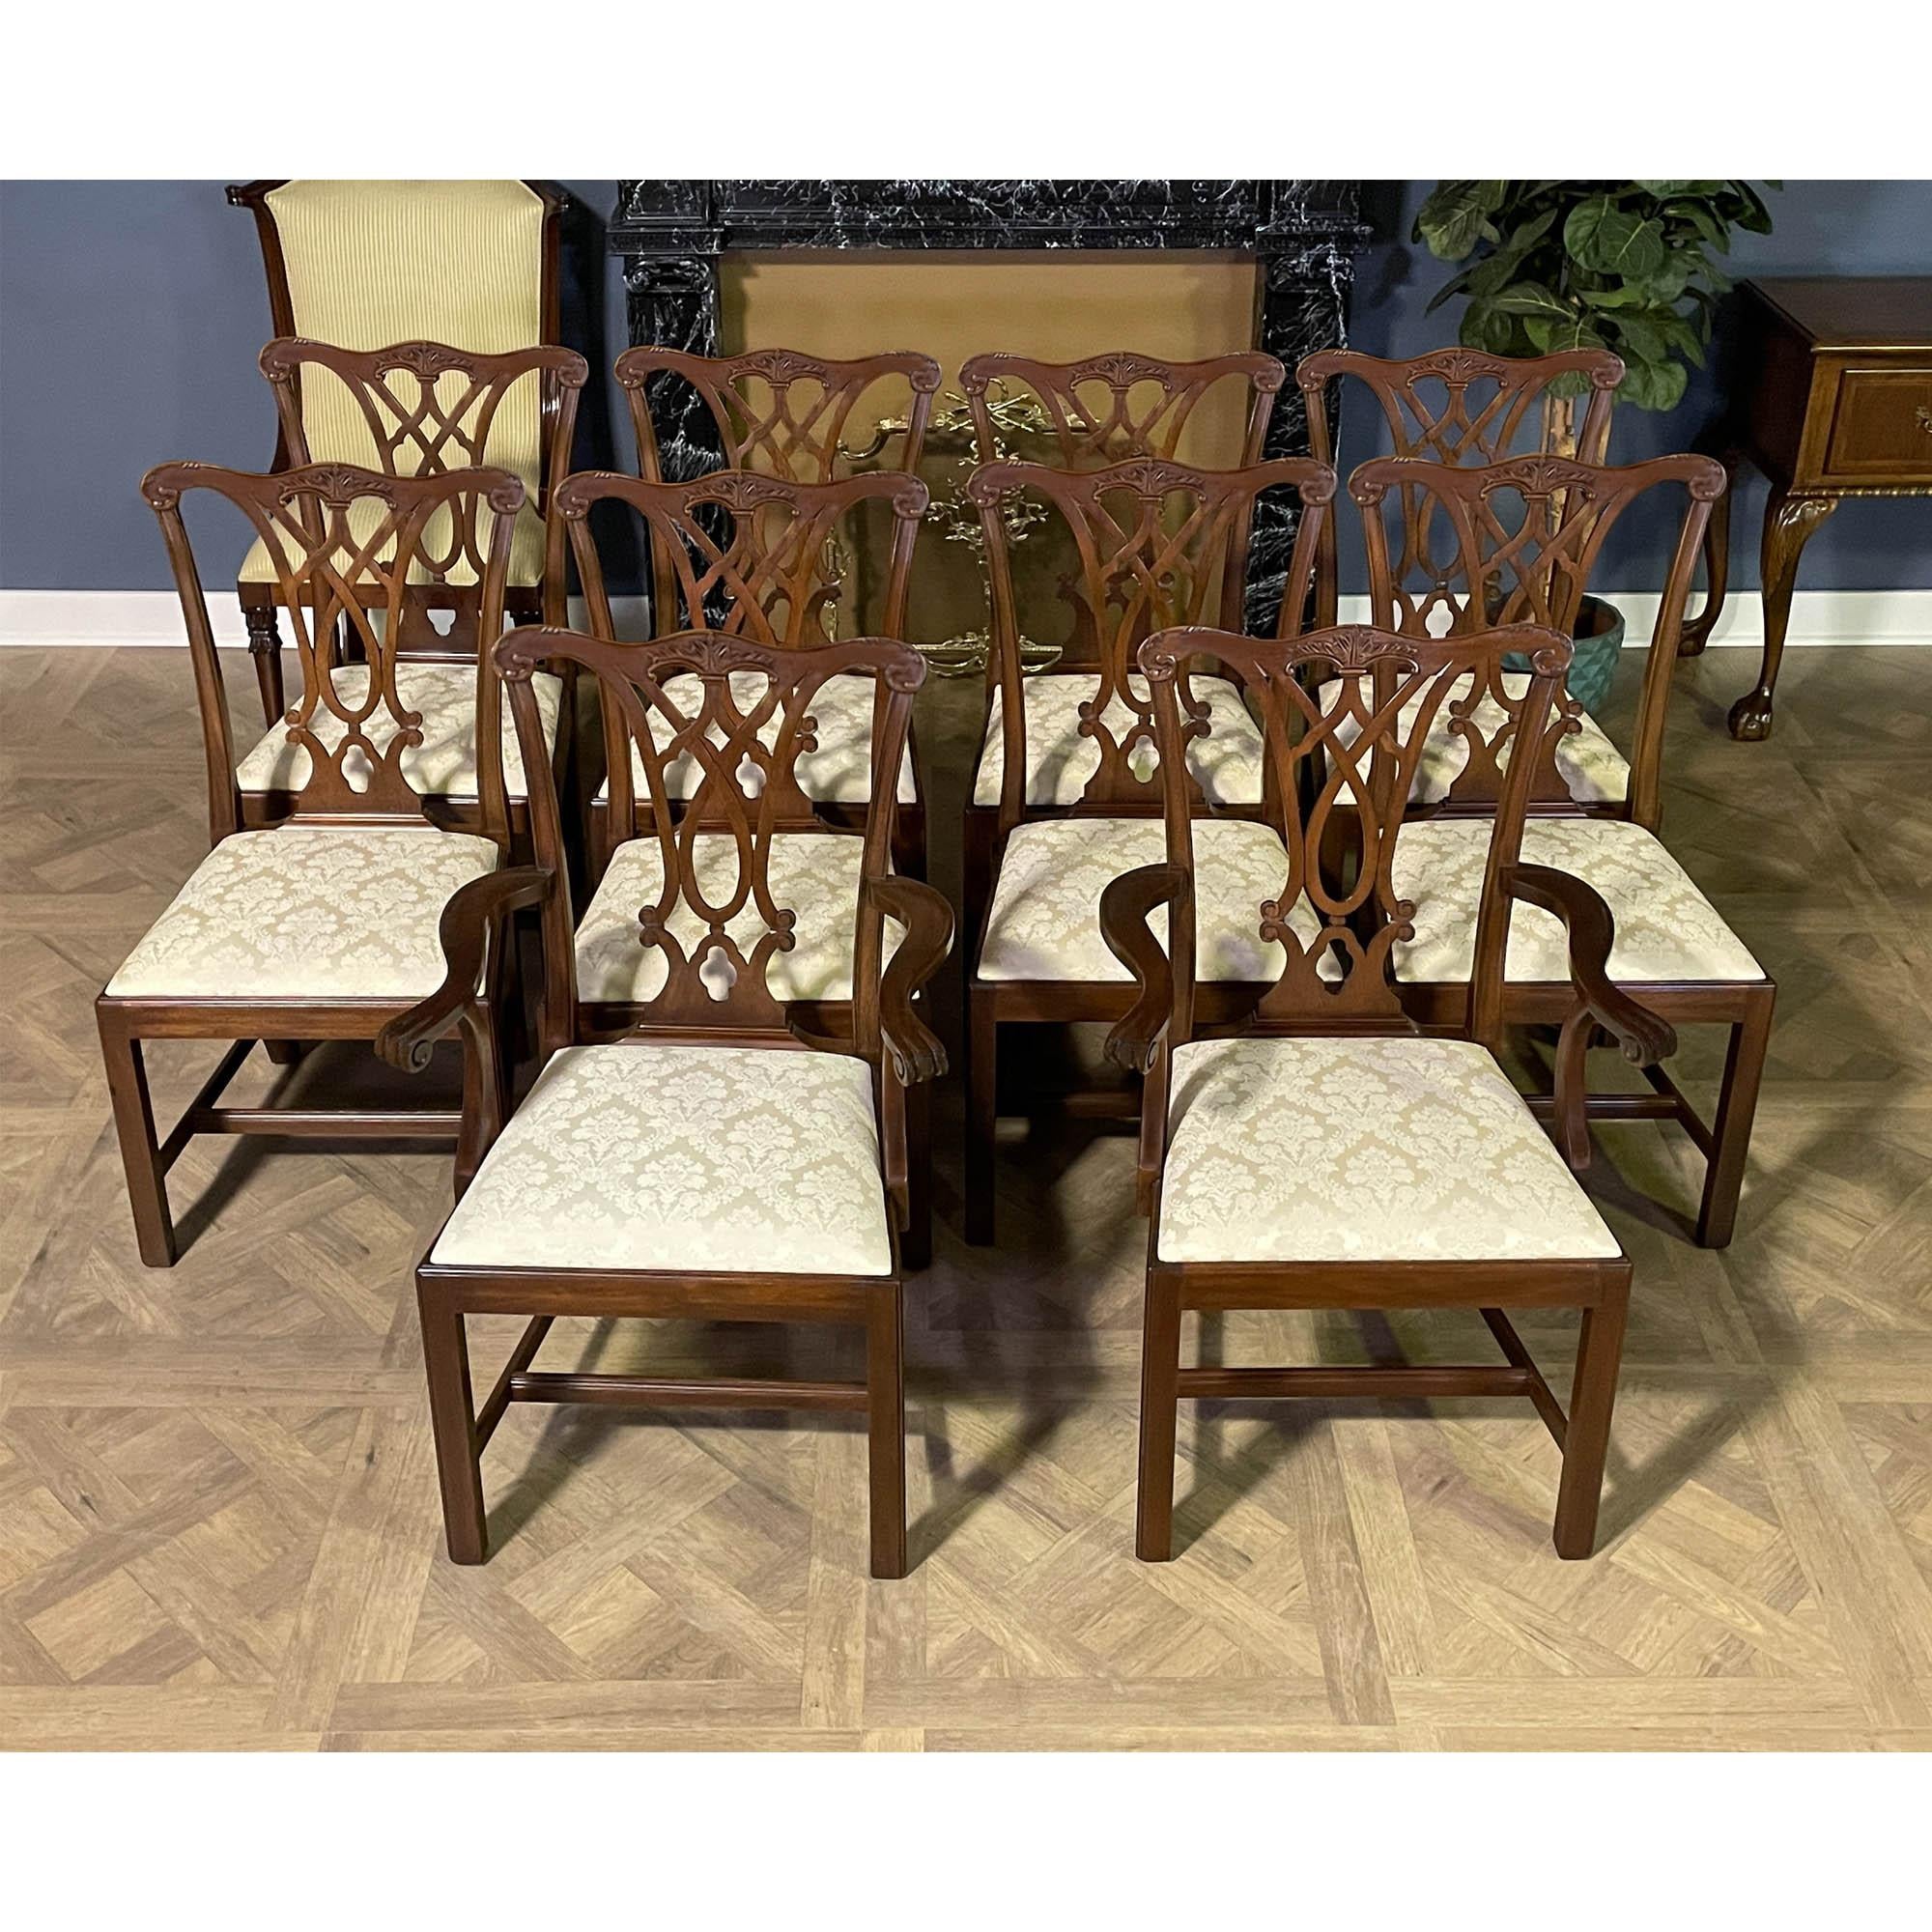 From Niagara Furniture a Set of 10 Henkel Harris Vintage Dining Chairs in excellent original, as found, condition.

Simple yet sophisticated this beautiful Set of 10 Henkel Harris Vintage Dining Chairs model 107 have everything going for them.